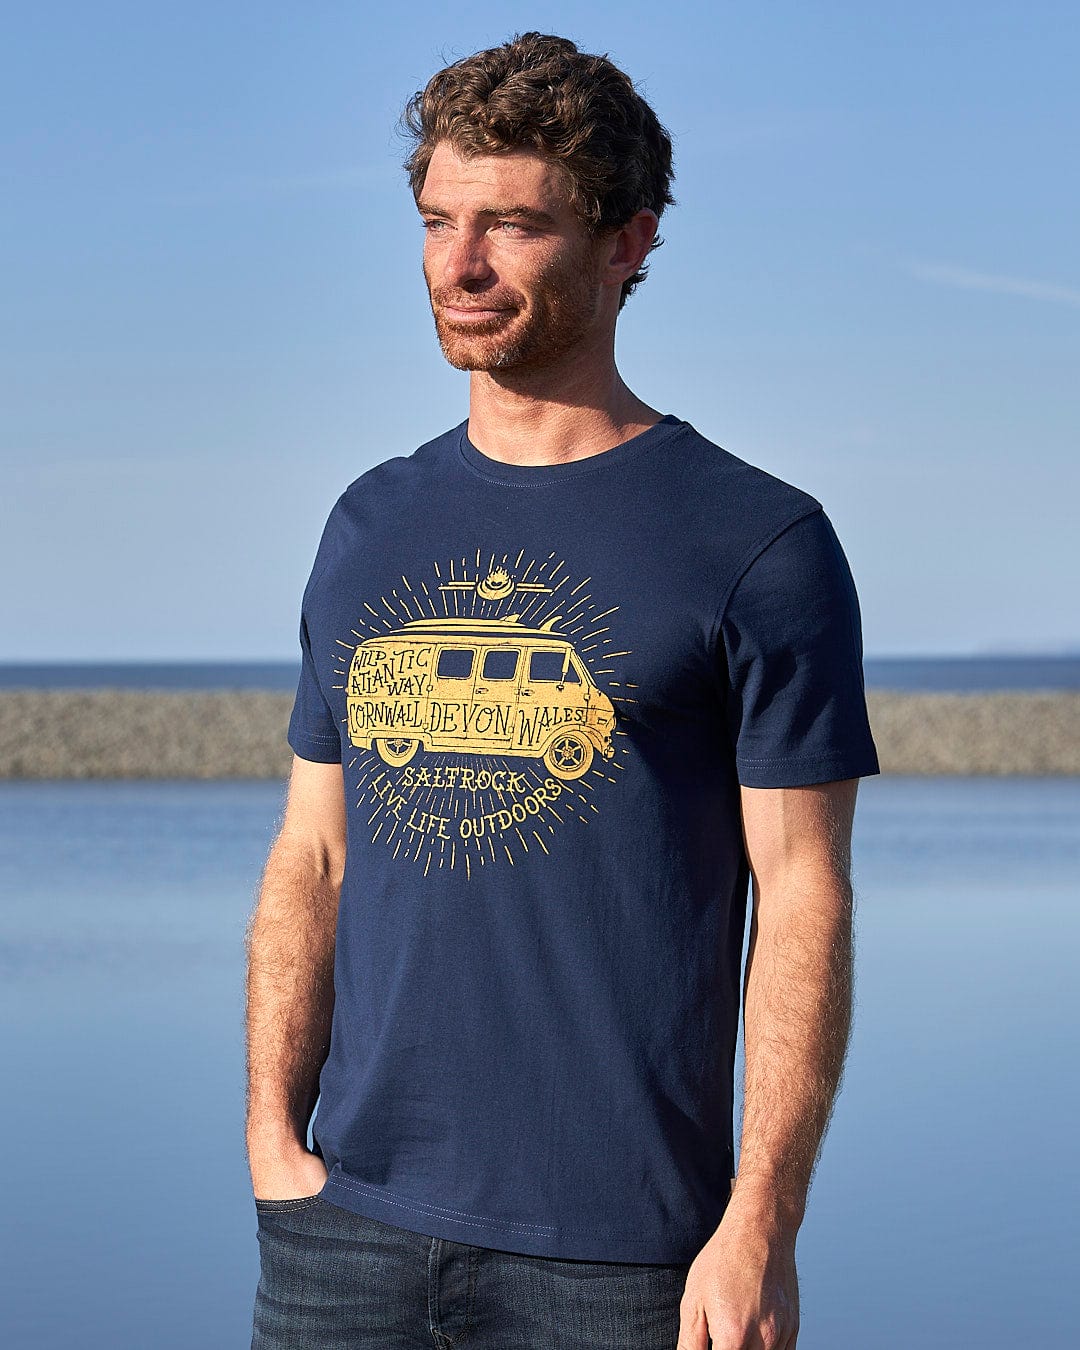 A man wearing a Saltrock Live Life Location - Mens Short Sleeve T-Shirt - Blue standing by the water.